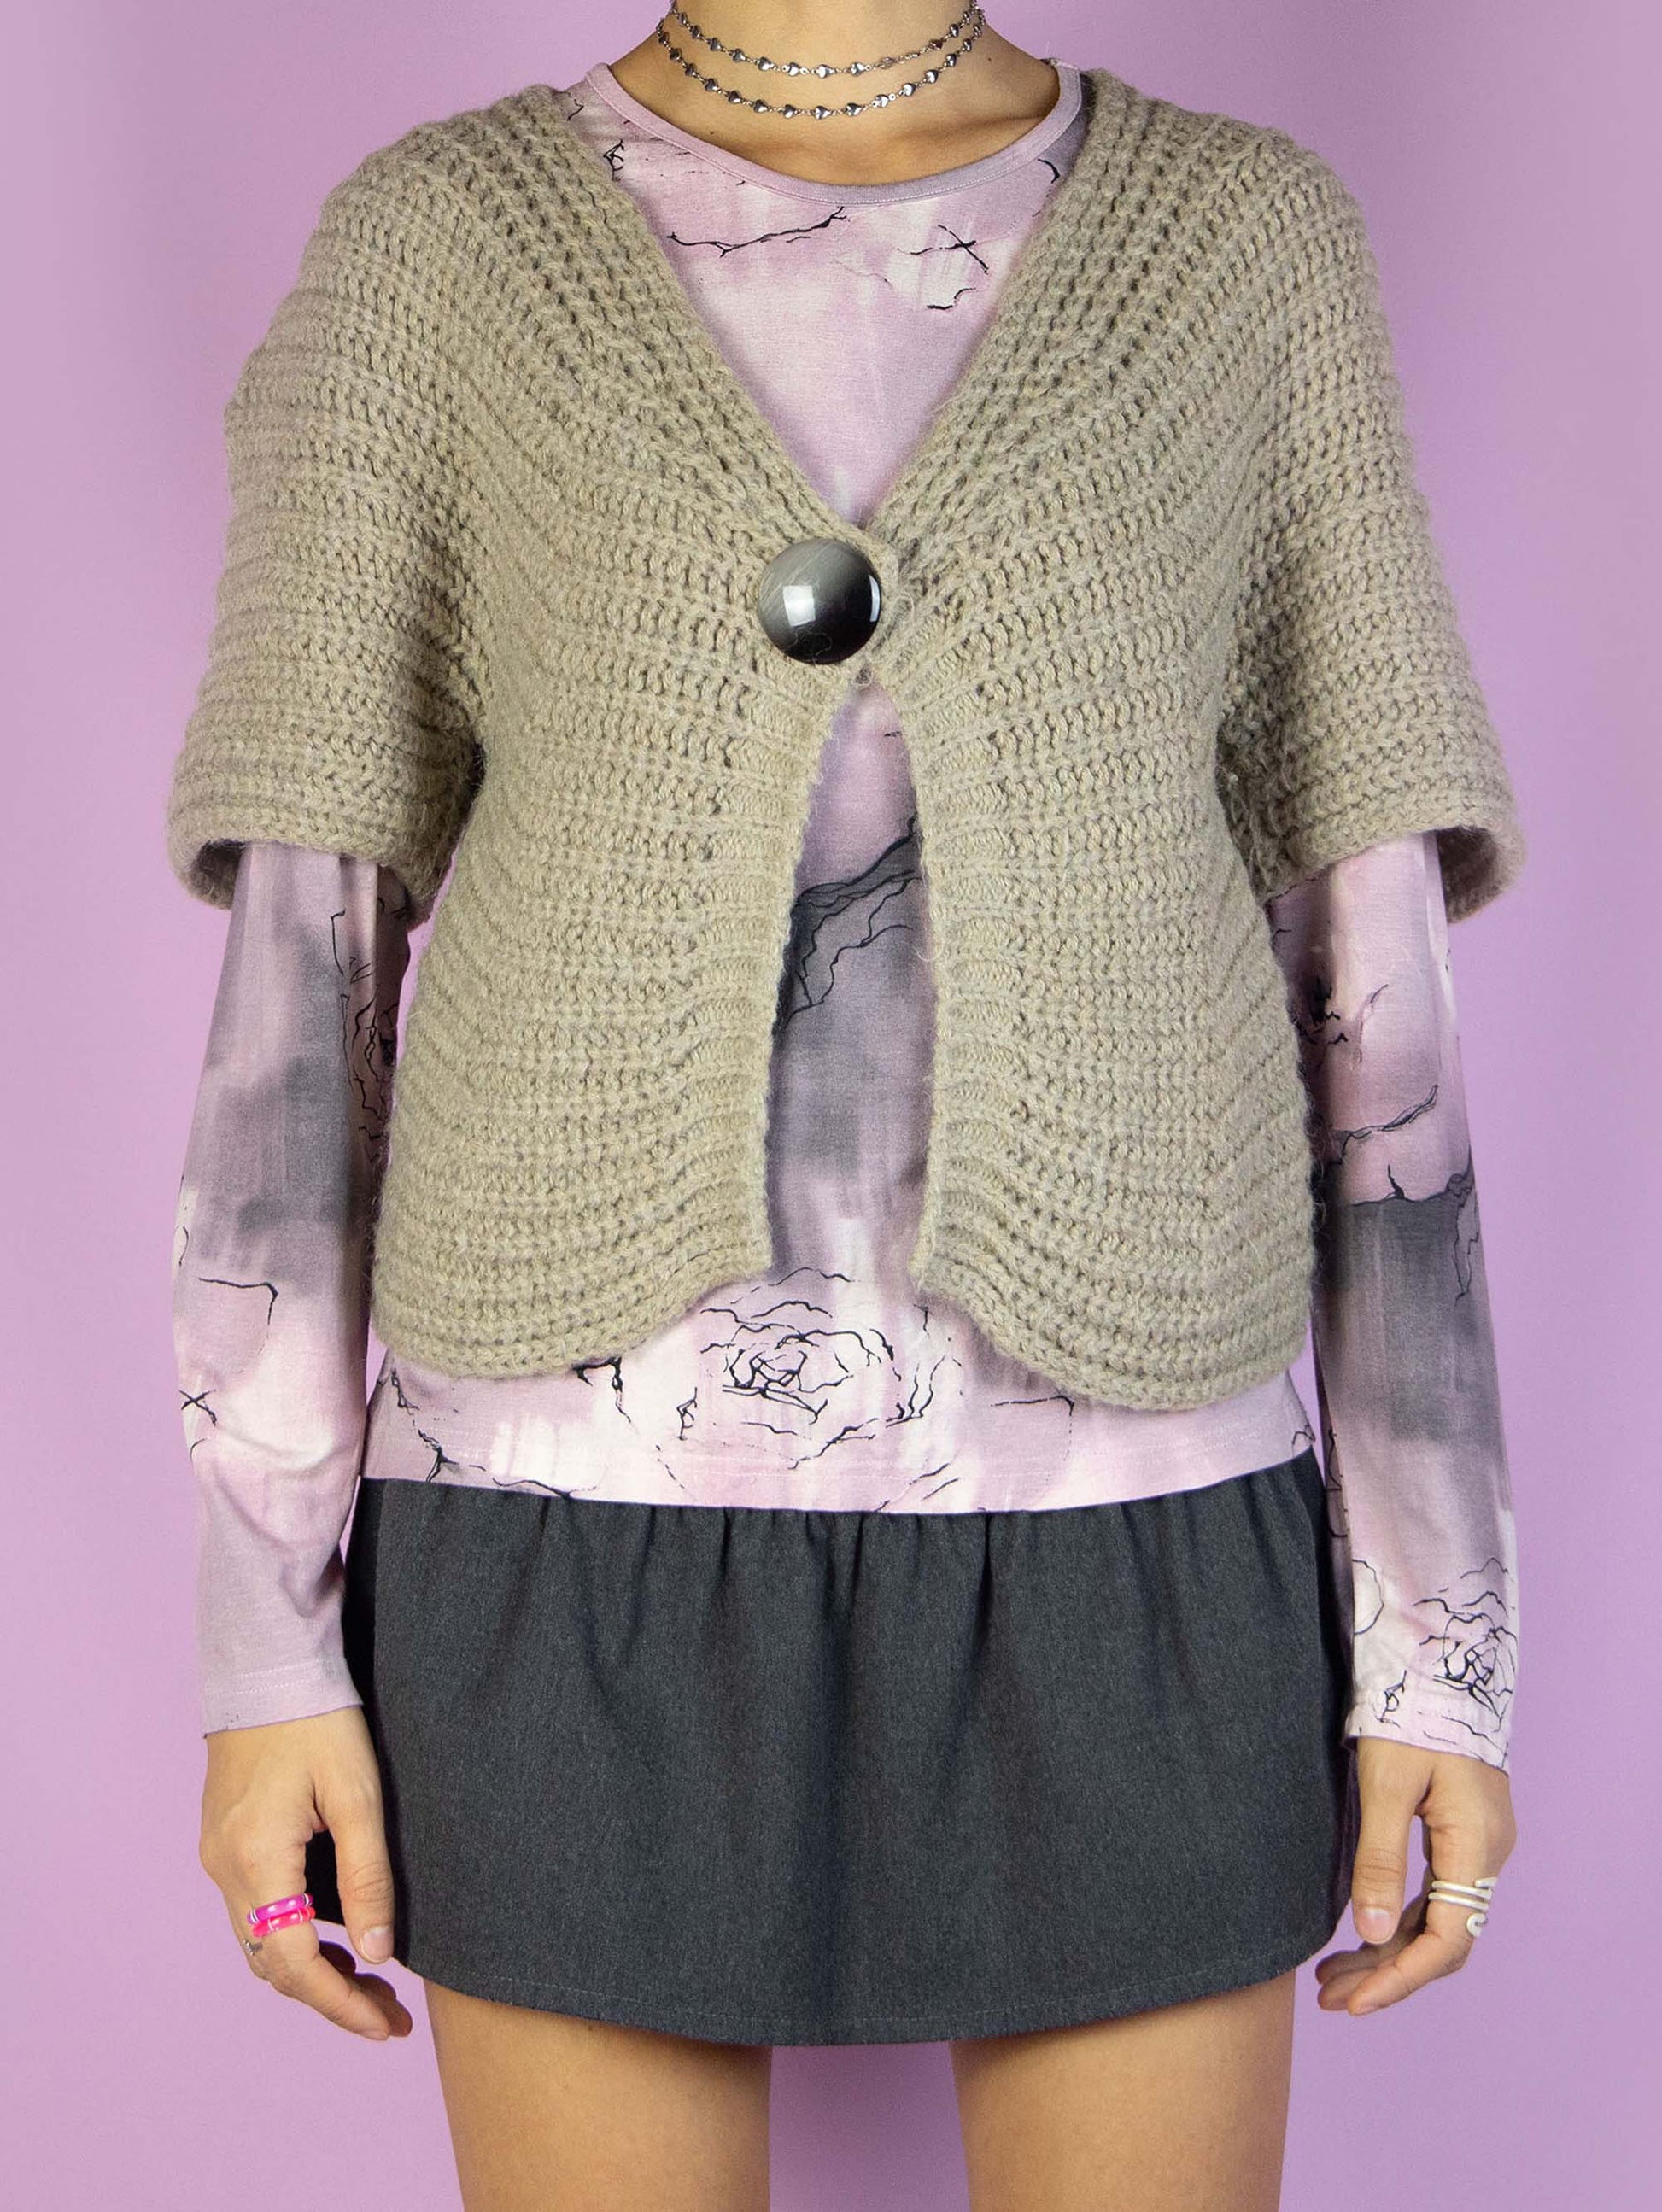  The Y2K Beige Knit Bolero Shrug is a vintage light brown beige chunky knit bolero jacket with short sleeves, a single-button closure, and made of a blend of wool and mohair. Cute boho fairy grunge 2000s cardigan.